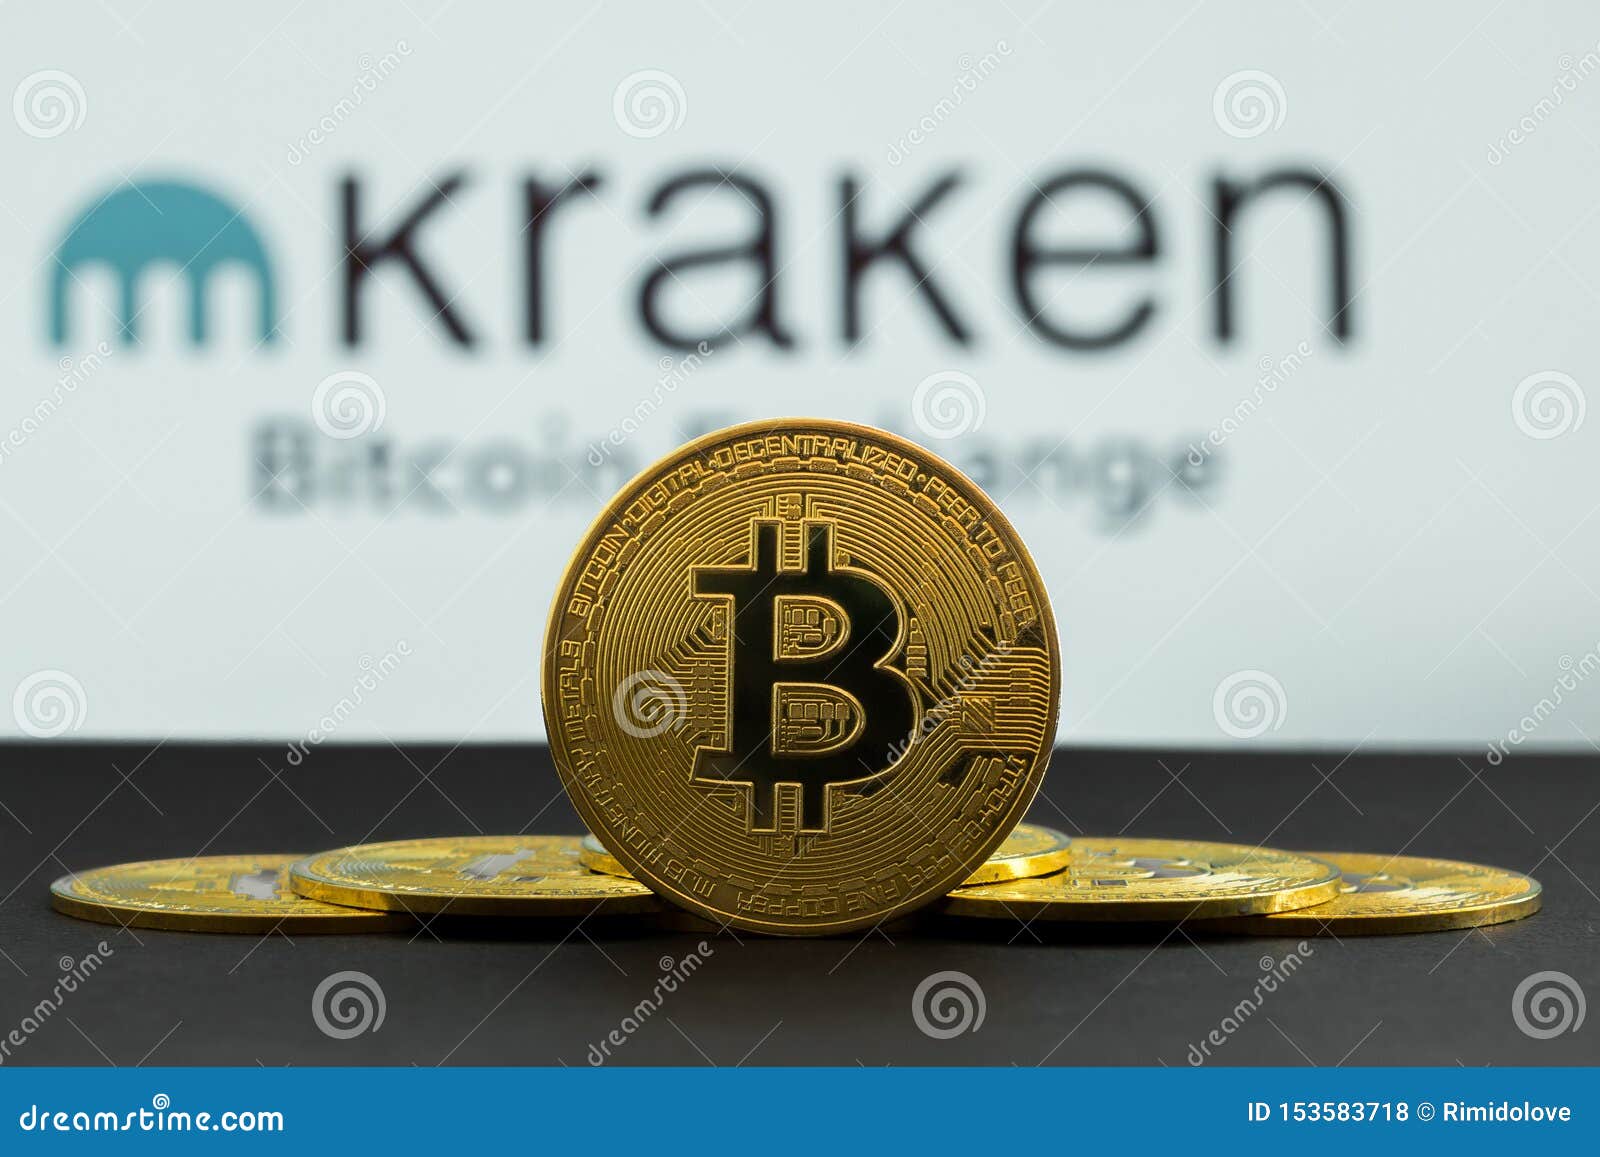 Bitcoin cash symbol kraken buy and sell crypto currency